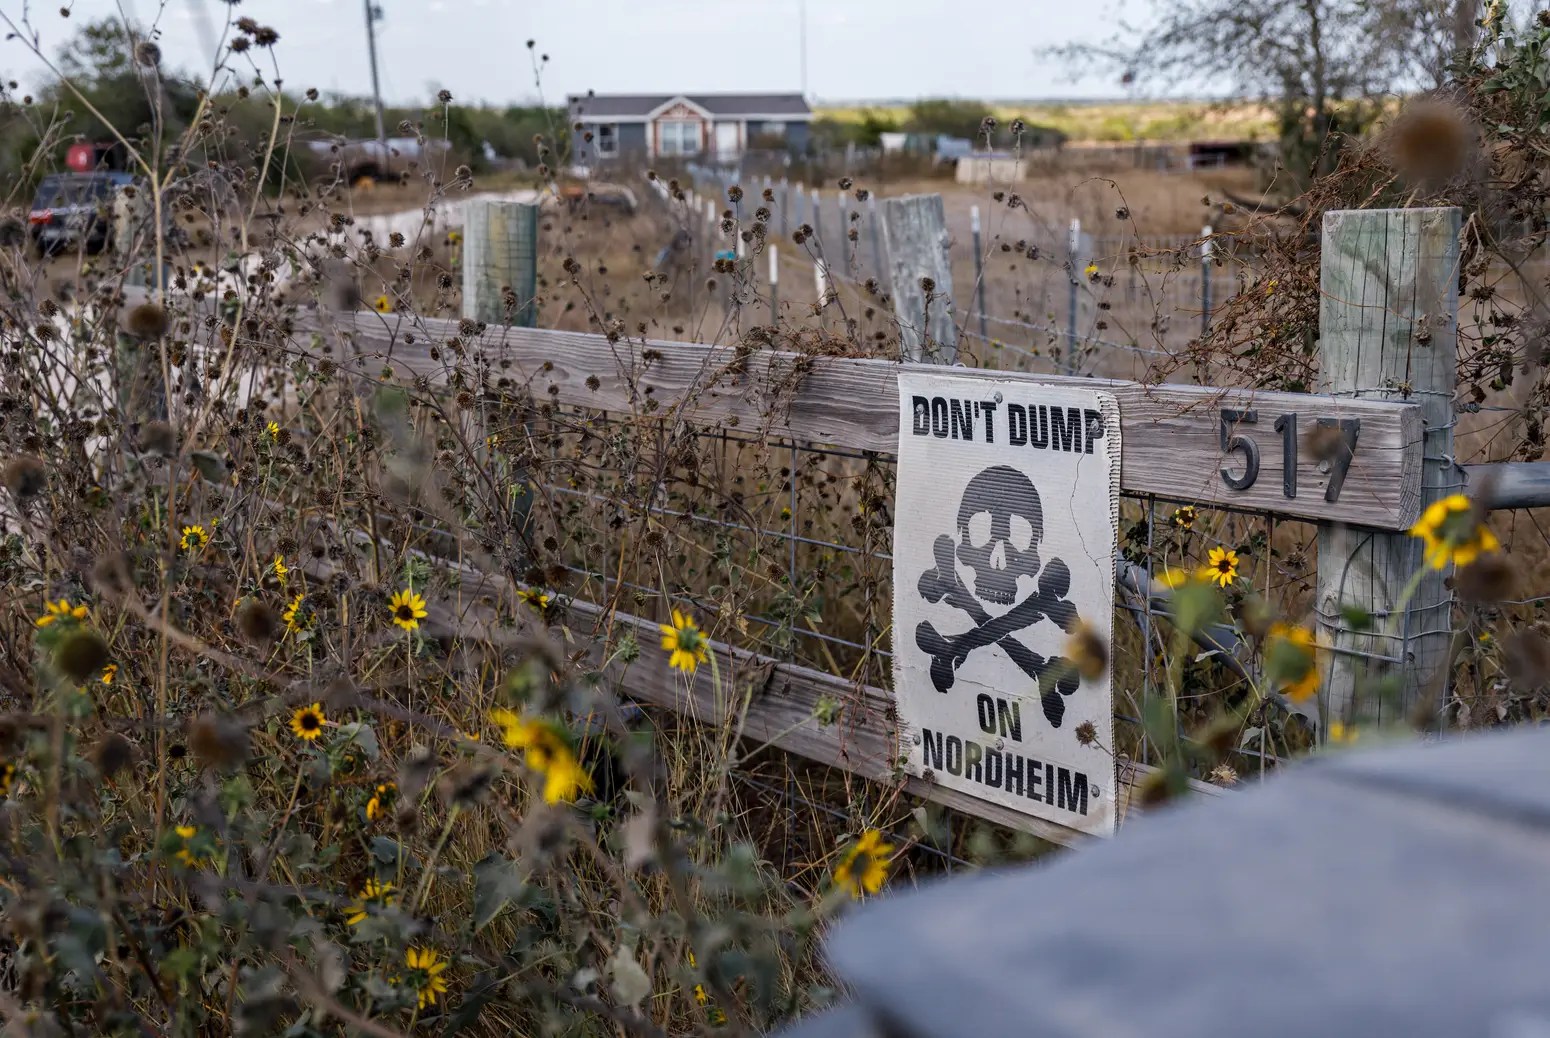 A wooden fence with yellow flowers poking out stands next to a sign that says "Don't dump on Nordheim."